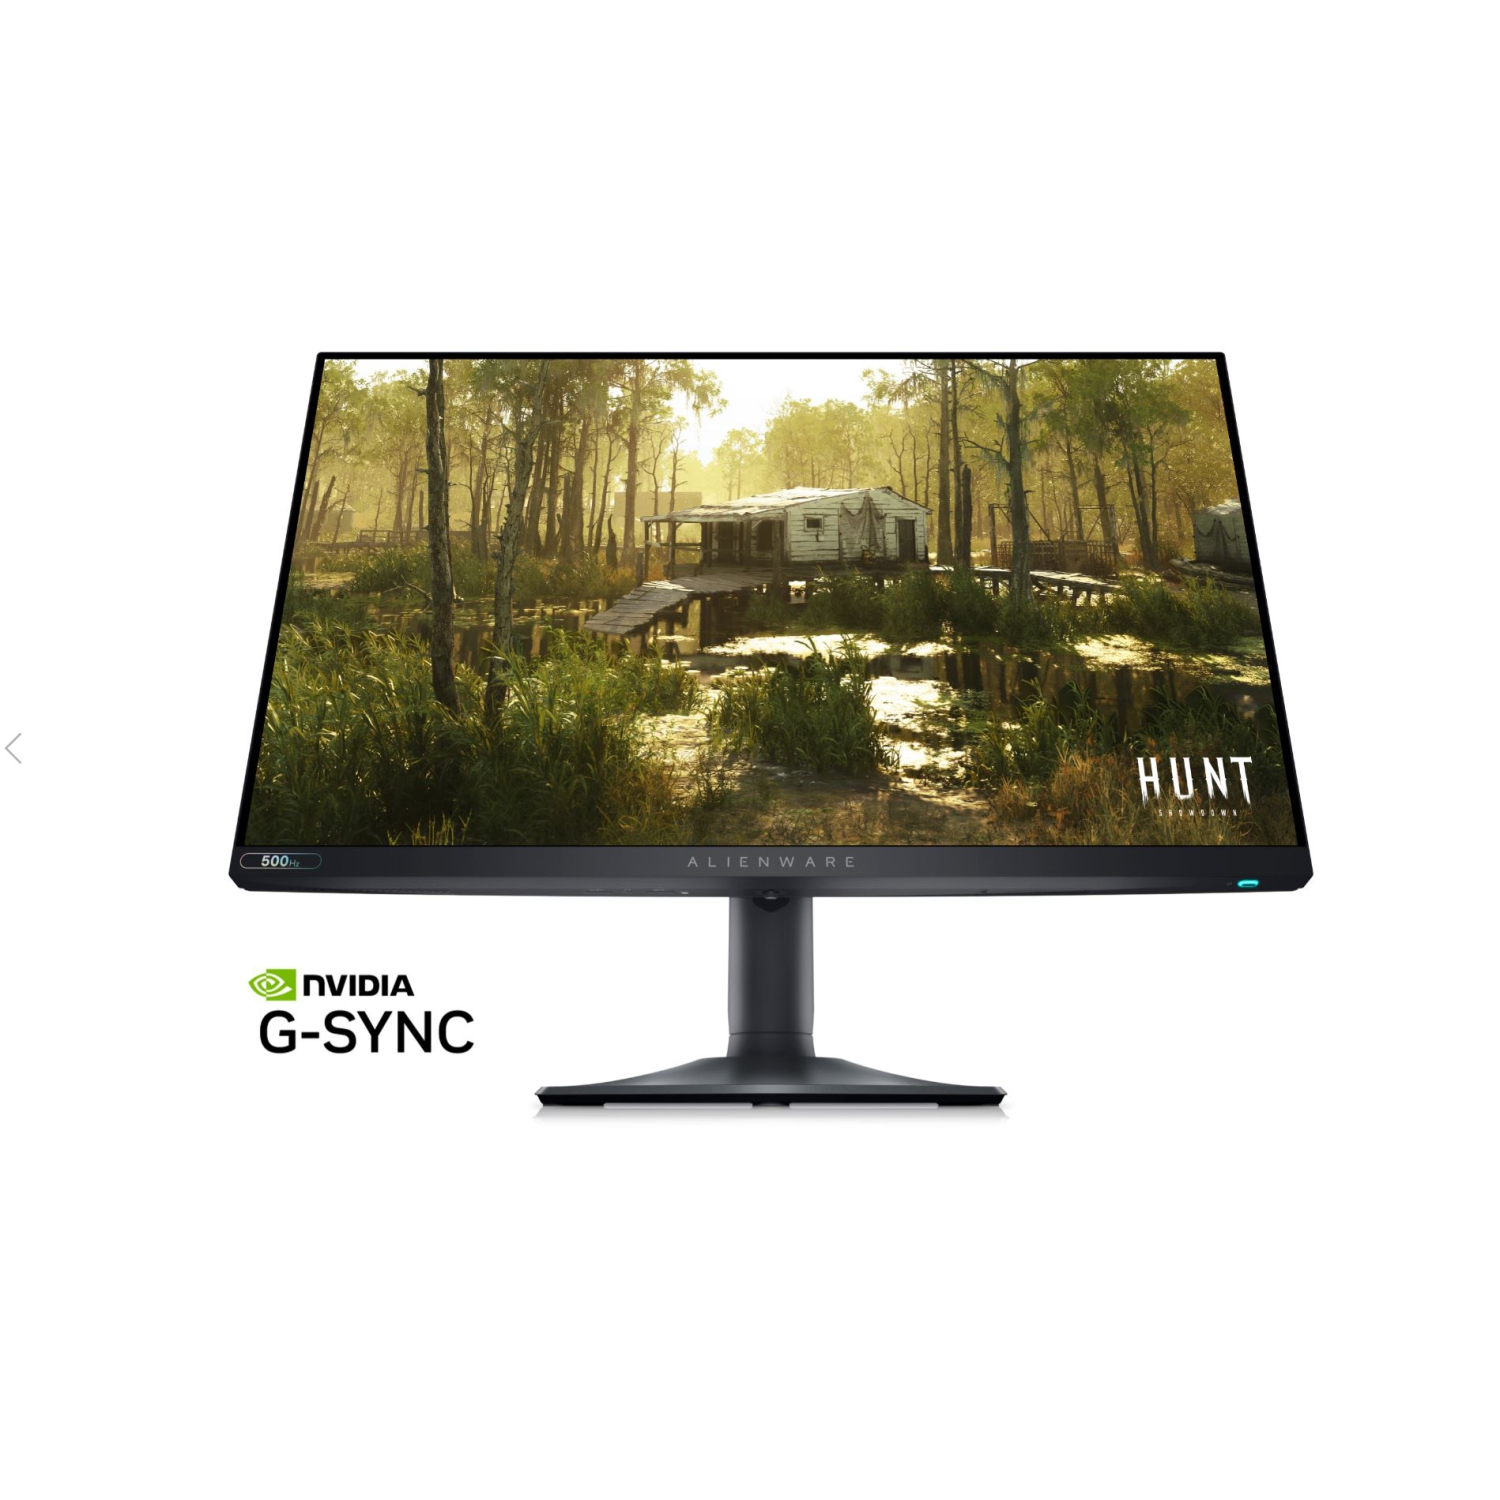 Dell AW2524H (Gaming) Monitor 25" FHD 1920X1080 DP 500Hz, Nvidia G Sync, DP, 2xHDMI, Certified Refurbished